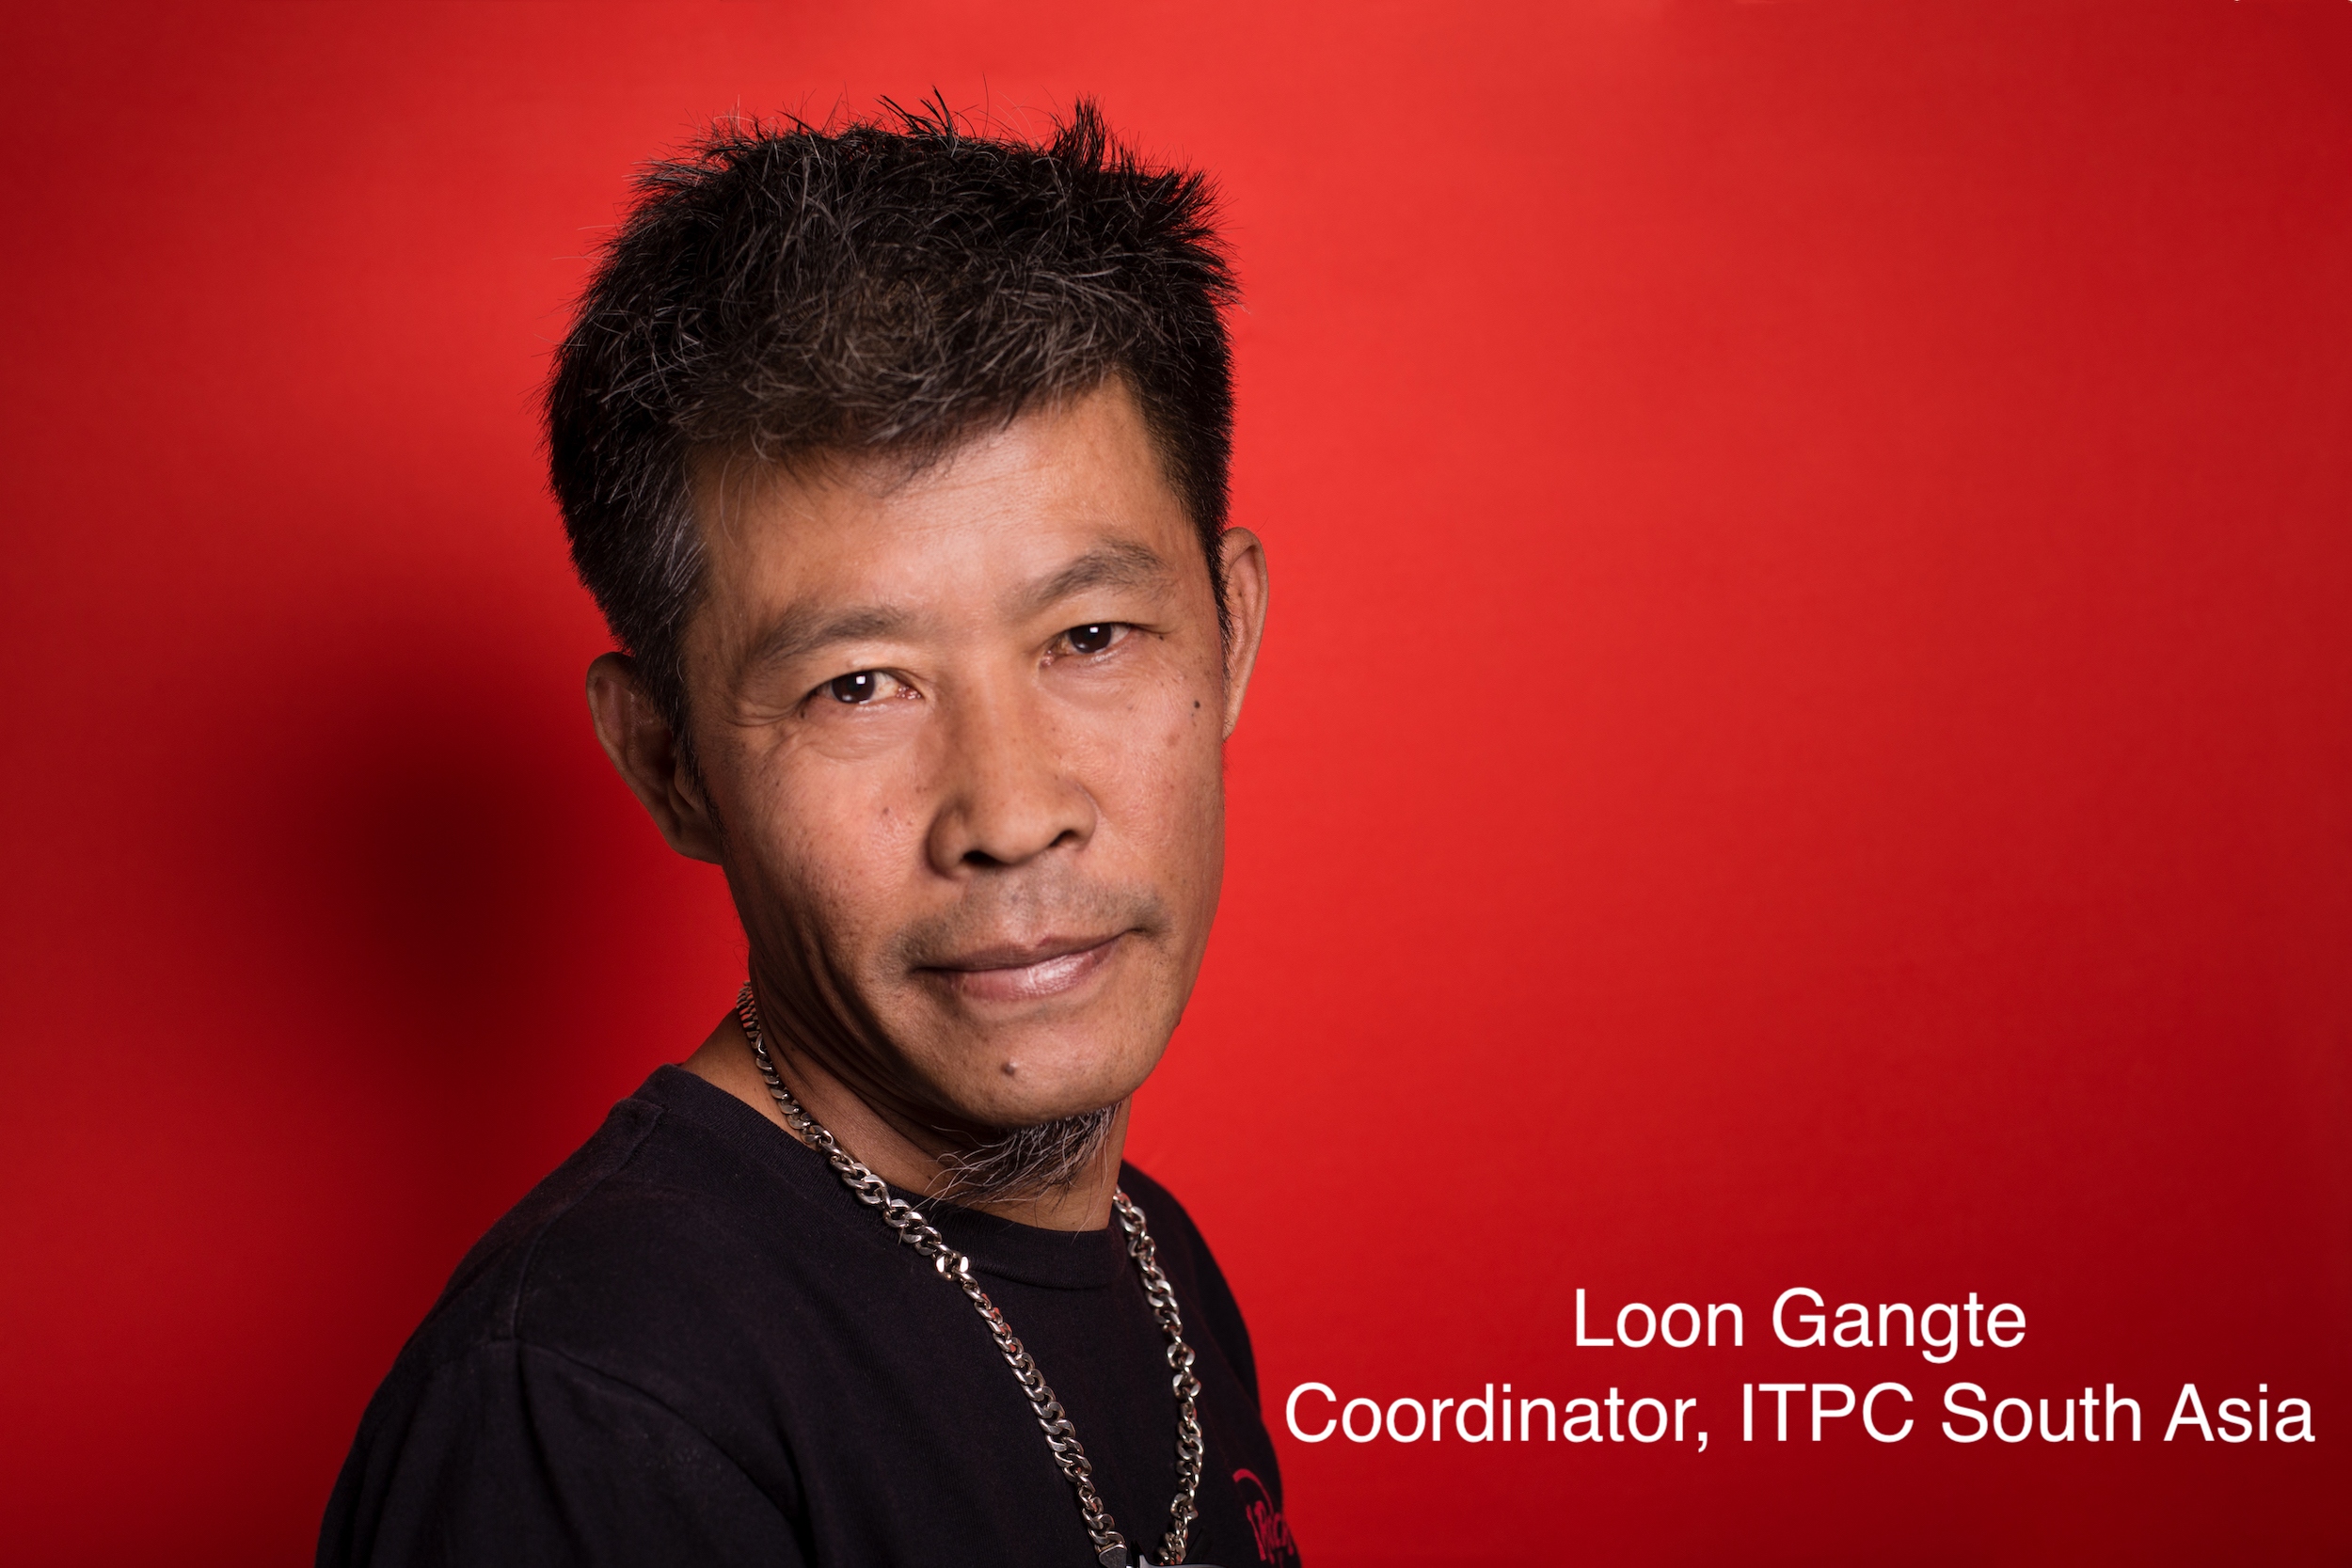 Loon Gangte, ITPC South Asia Coordinator, receives Elizabeth Taylor award at AIDS 2020